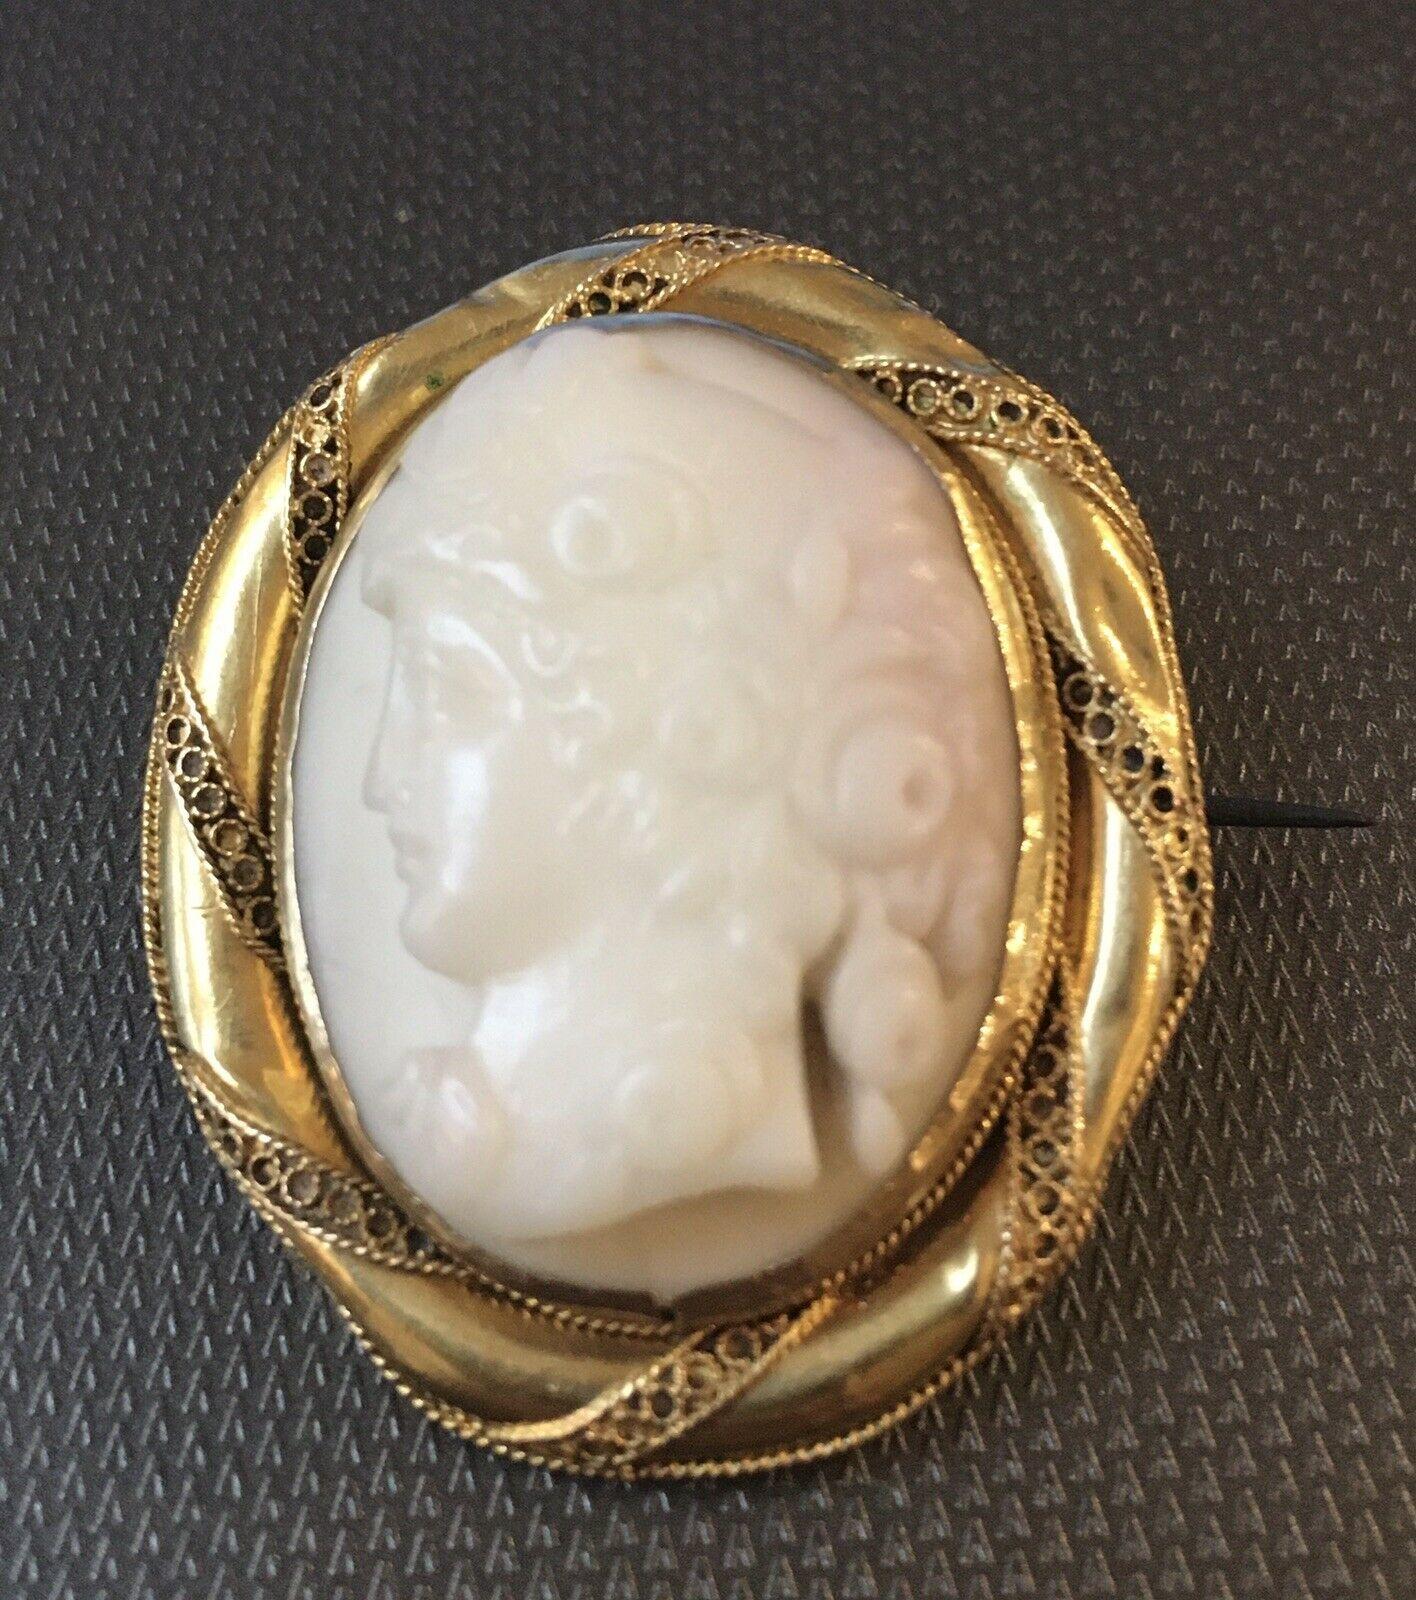 Antique Victorian 18ct Yellow Gold Angelskin Coral Carved Cameo Brooch c 1860